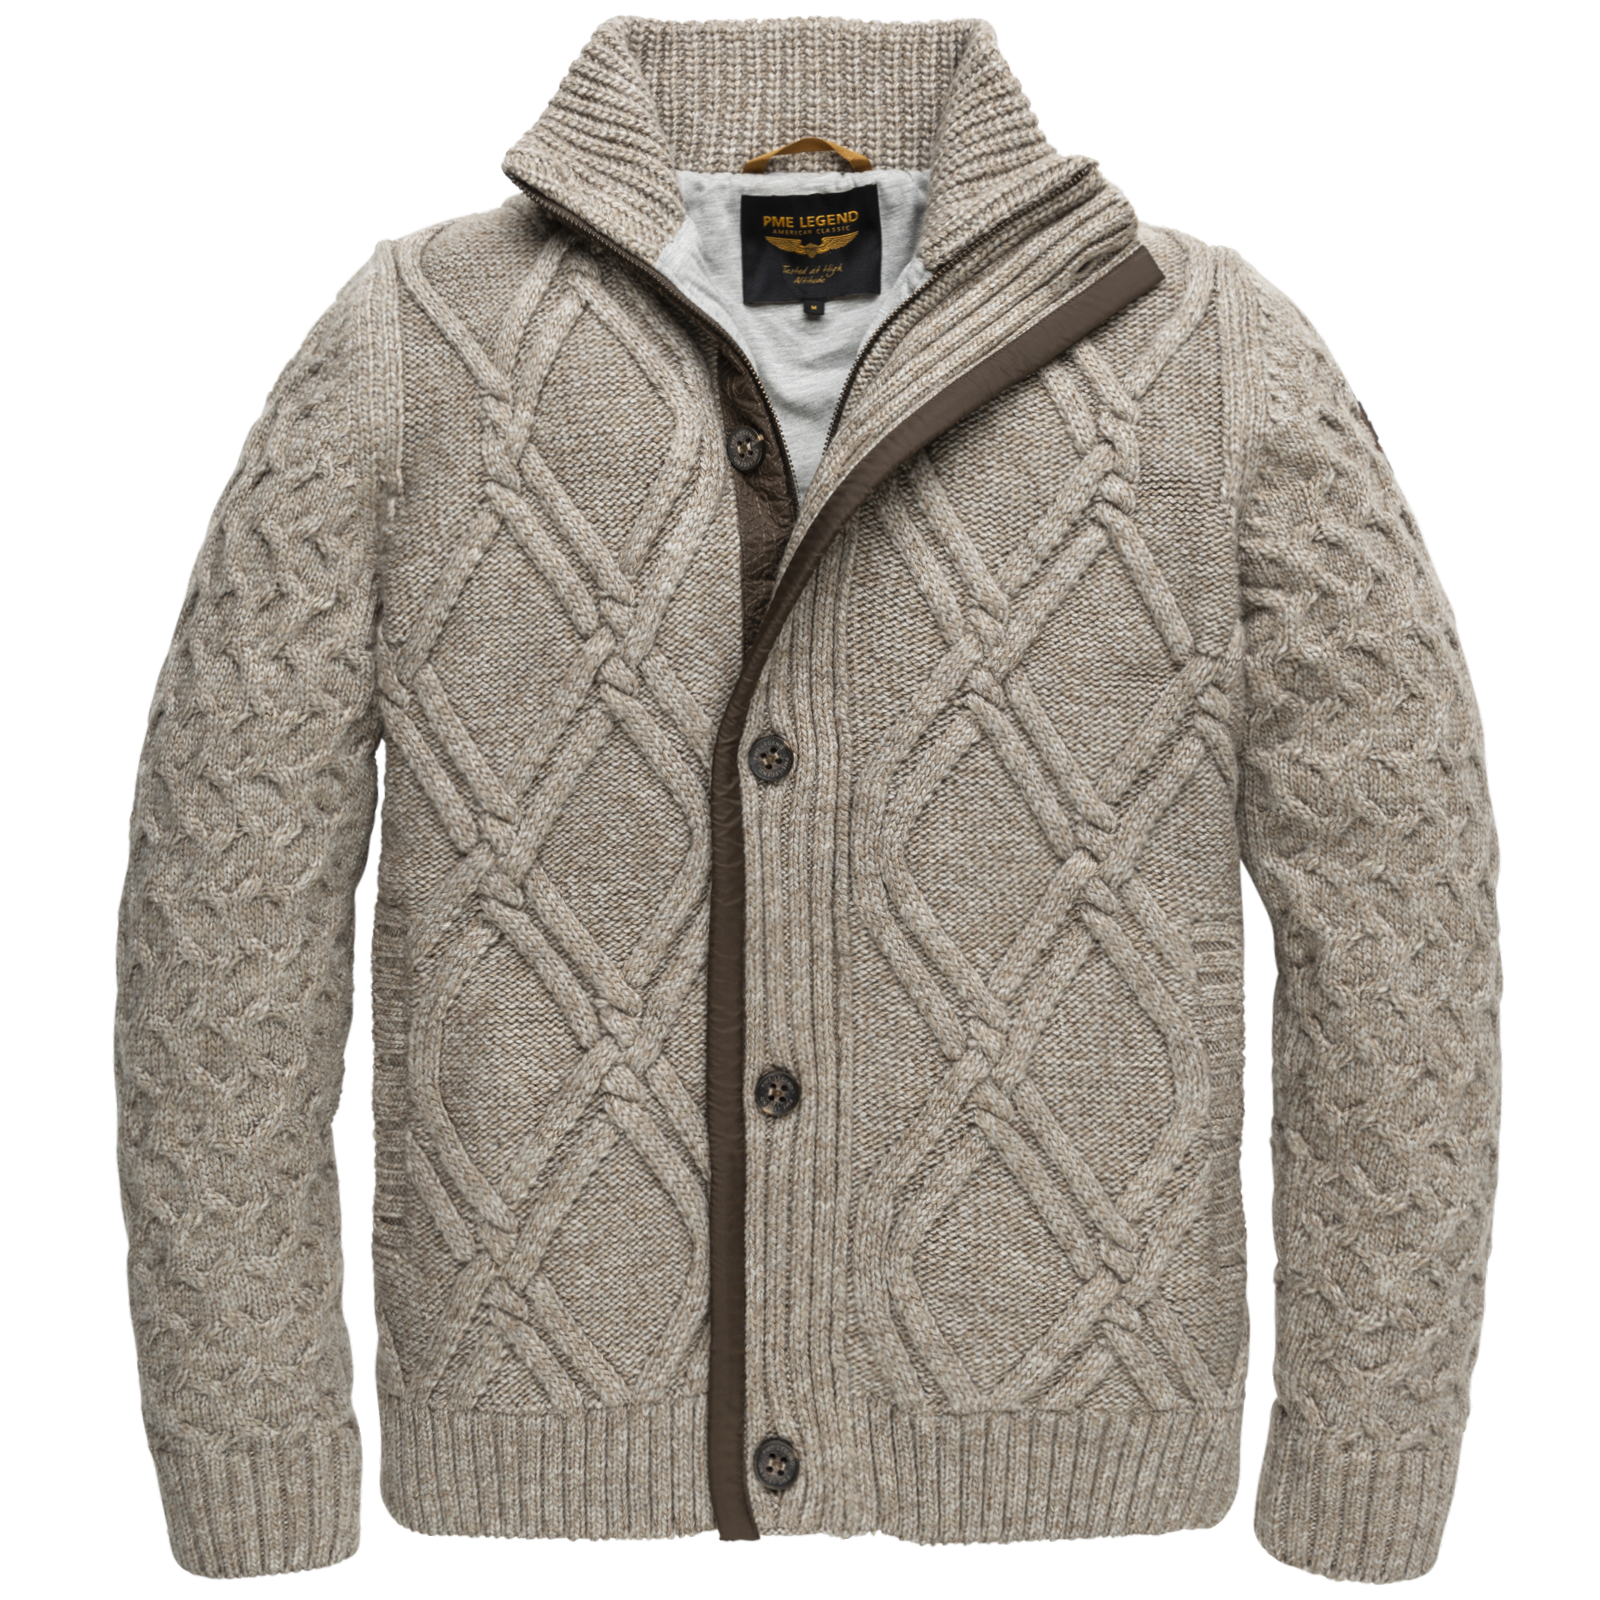 domein deze kennis Pme Legend Heavy Knitted Jacket Online, SAVE 48% - icarus.photos